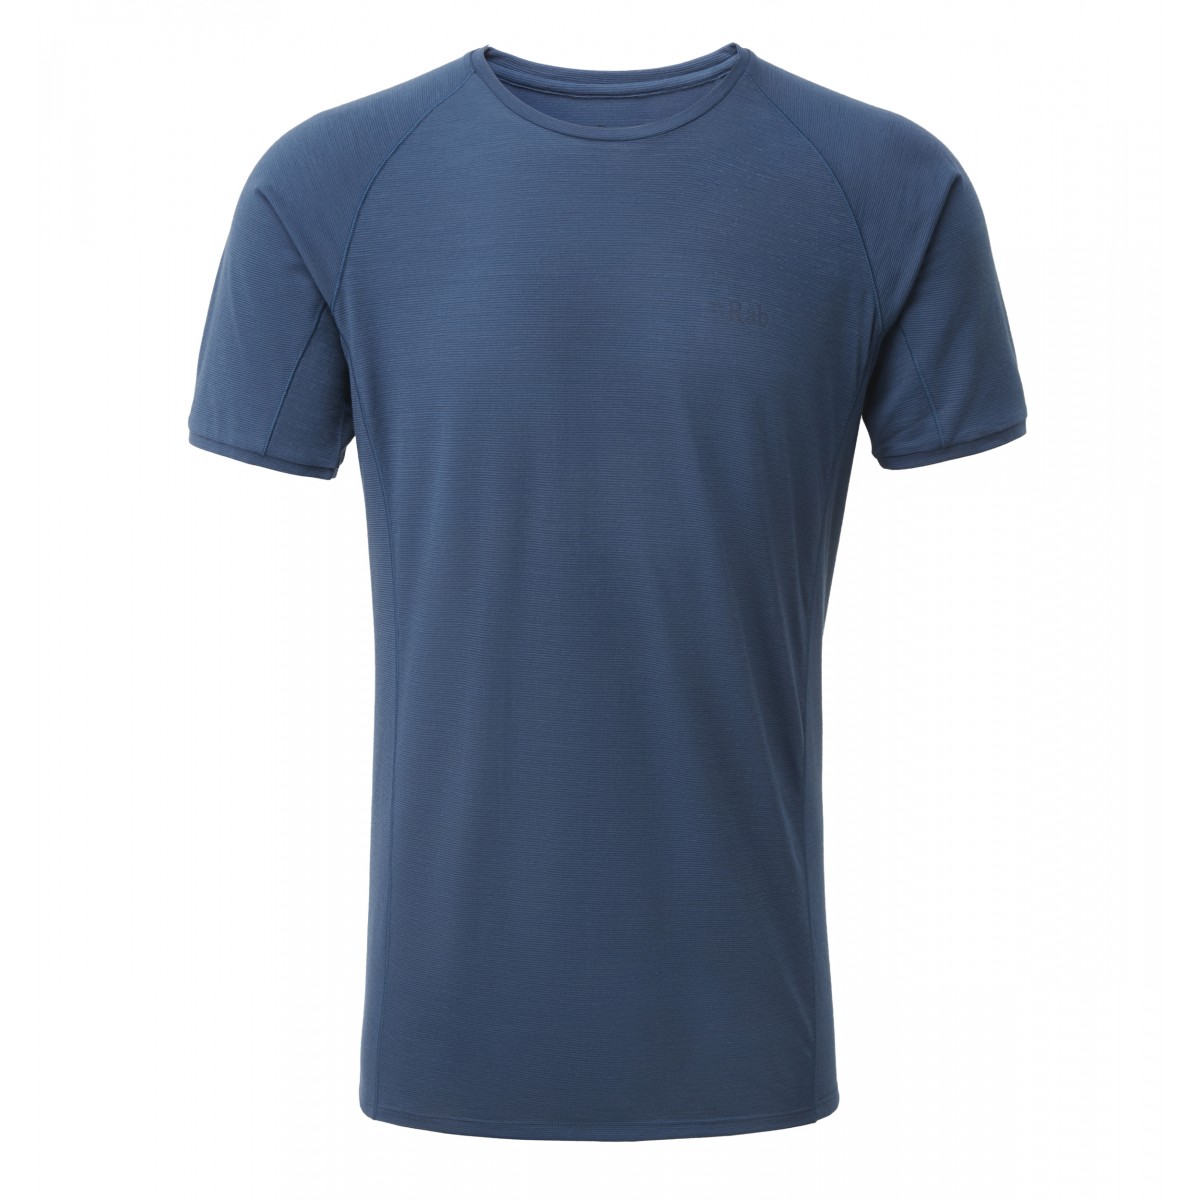 https://www.thegorgeoutdoors.co.uk/image/cache/catalog/products/Rab/mens-forge-tee-ink-1200x1200.jpg